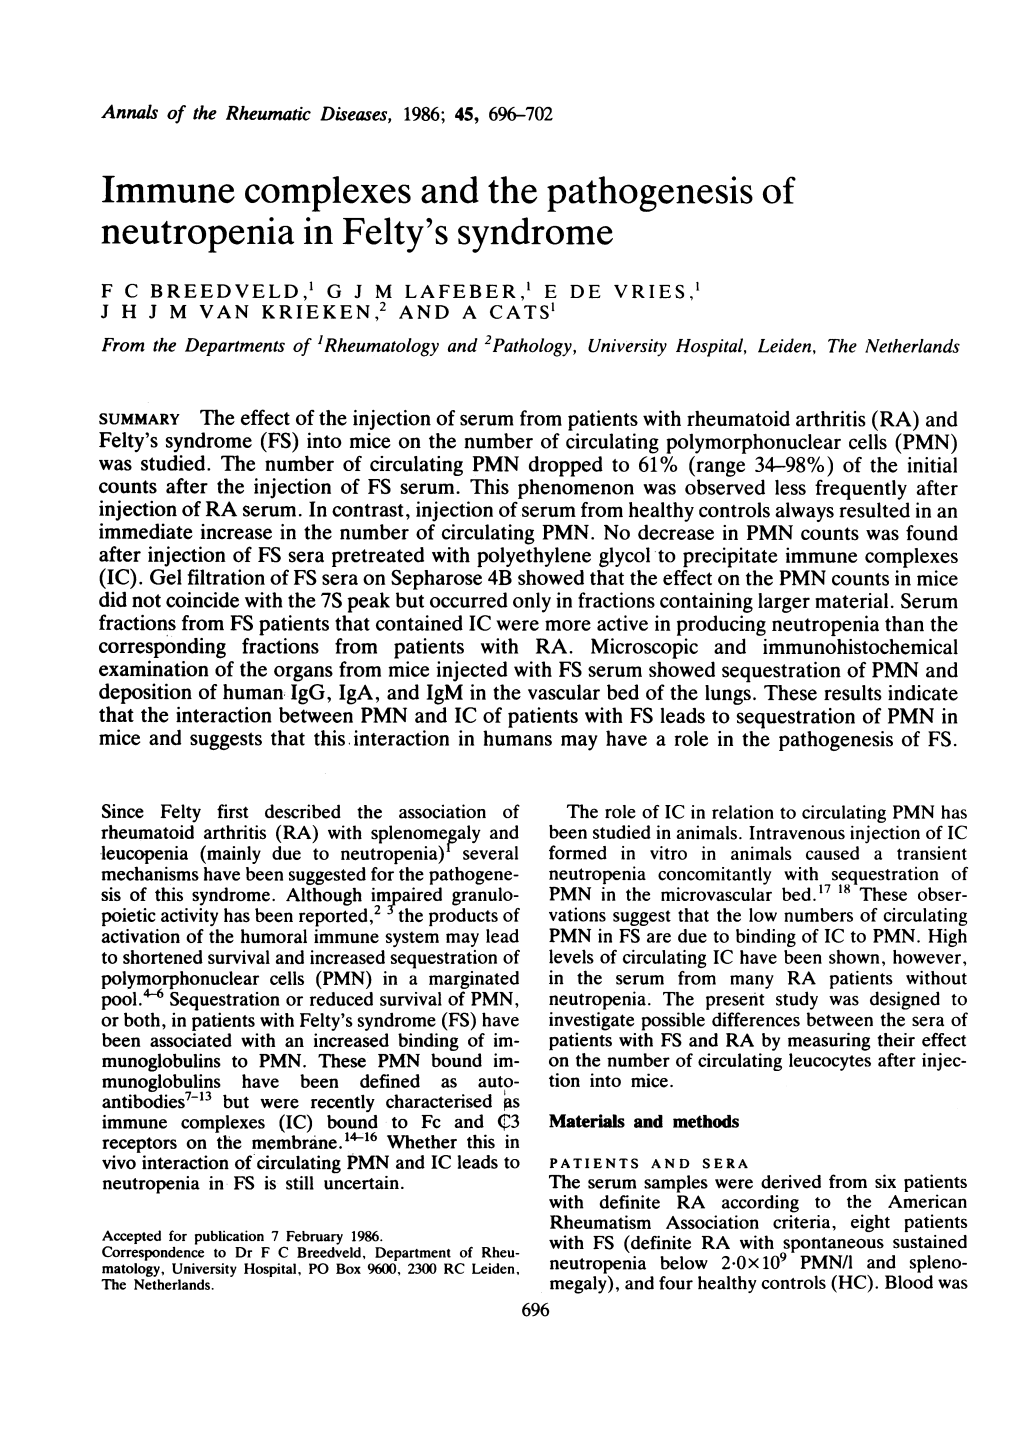 Immune Complexes and the Pathogenesis of Neutropenia in Felty's Syndrome